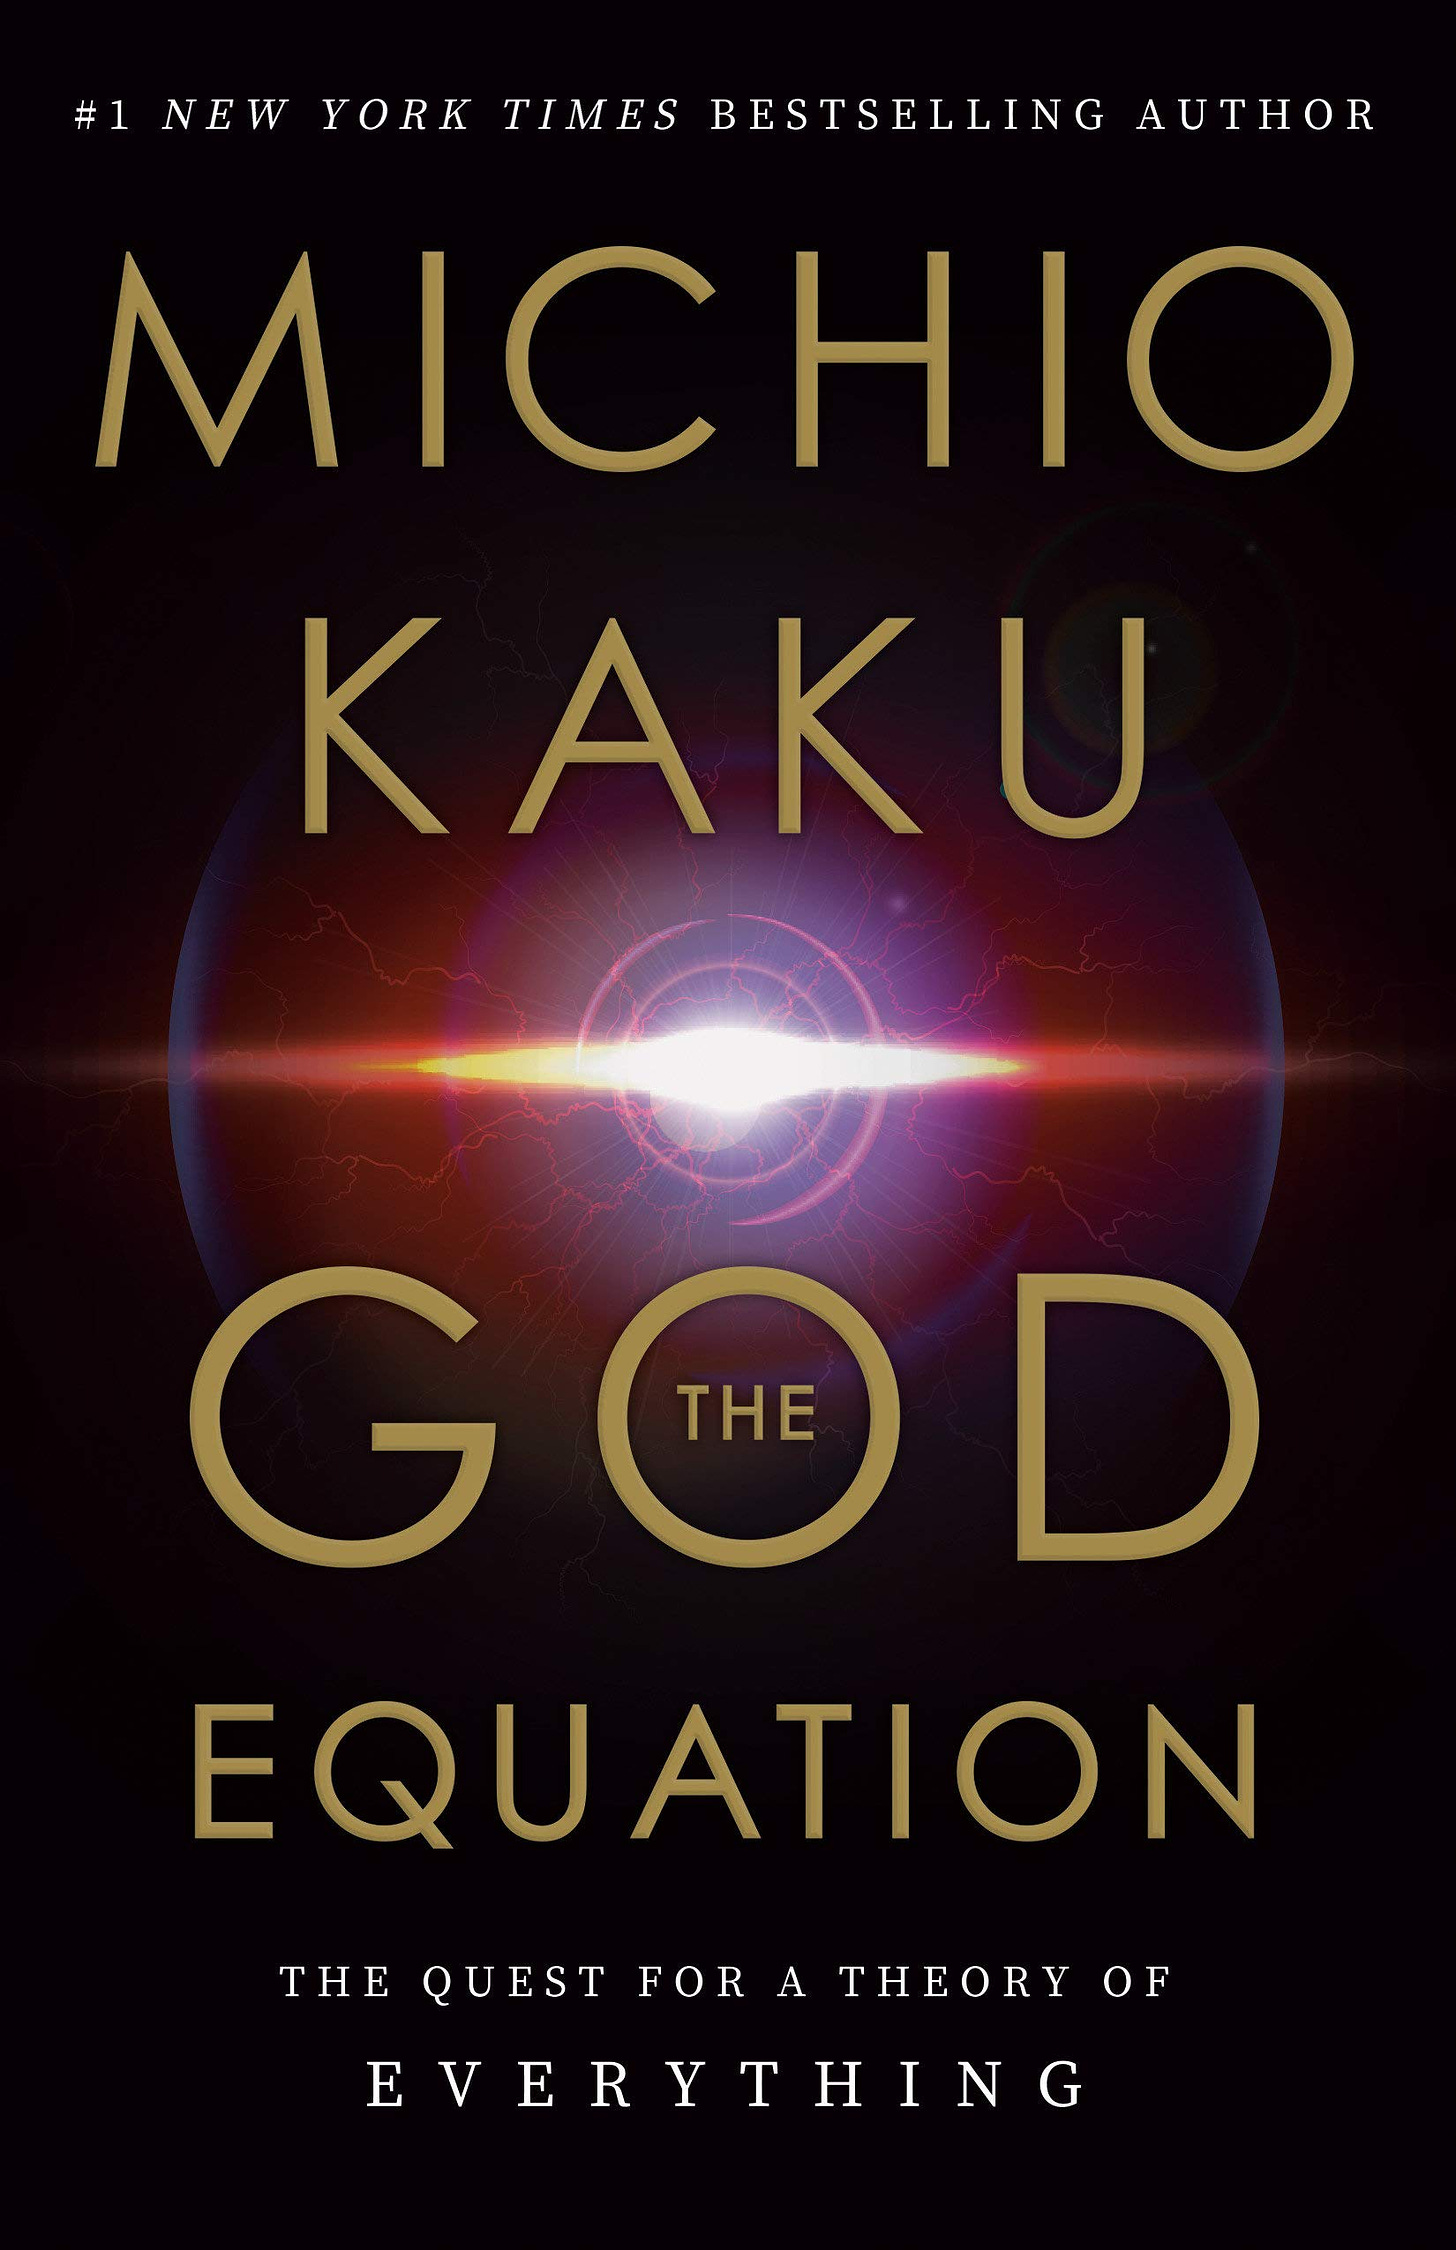 Amazon - The God Equation: The Quest for a Theory of Everything: Kaku,  Michio: 9780385542746: Books